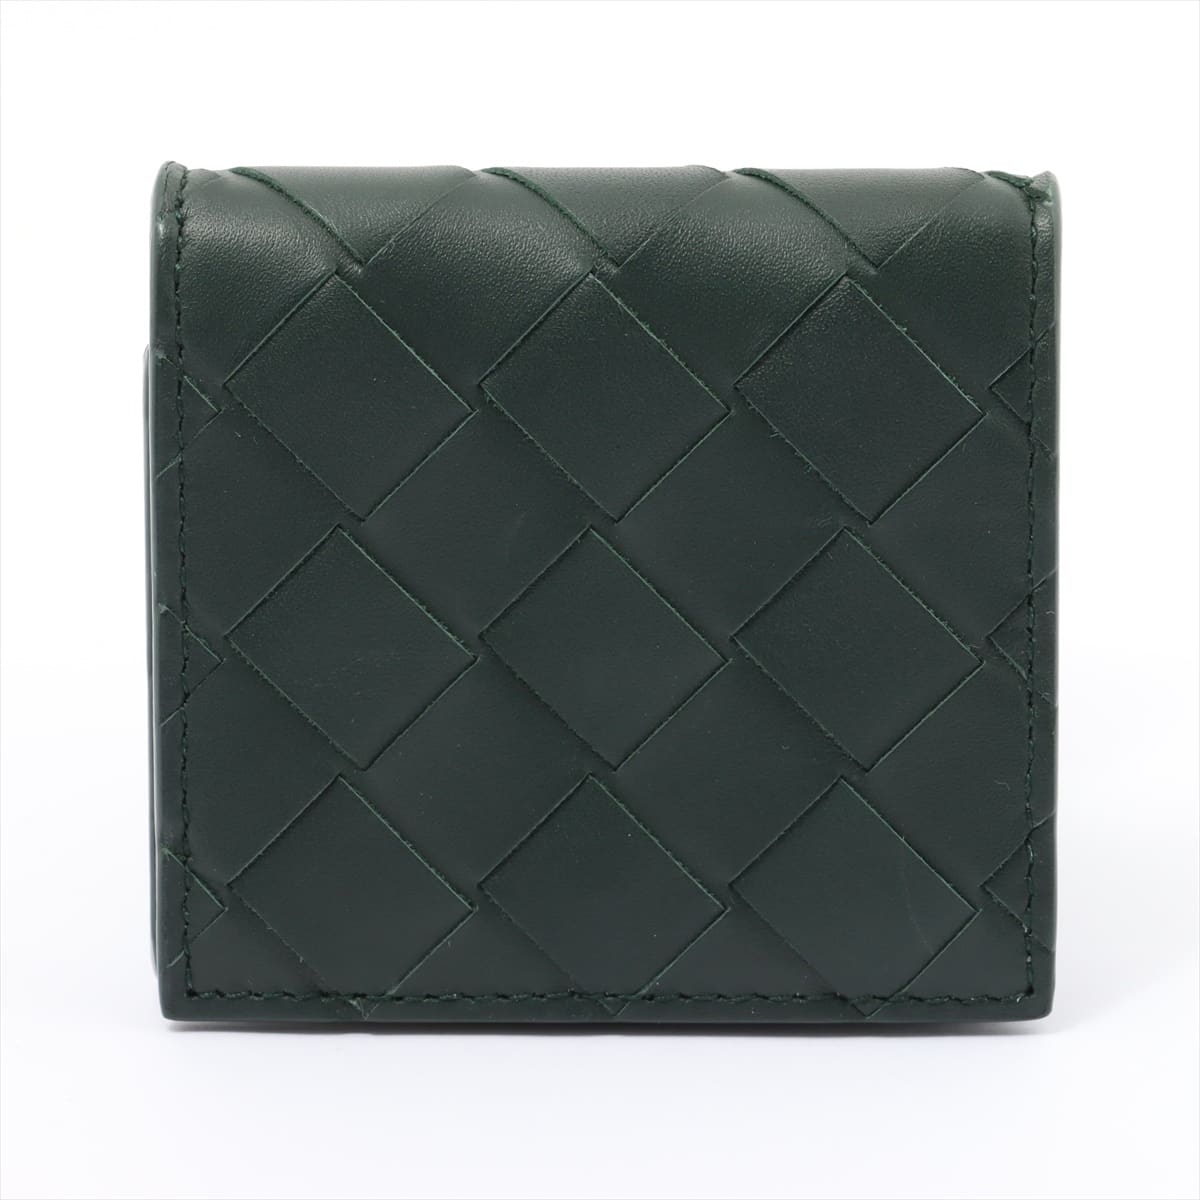 Bottega Veneta Intrecciato Leather Coin case Green There is a smell of all the threads